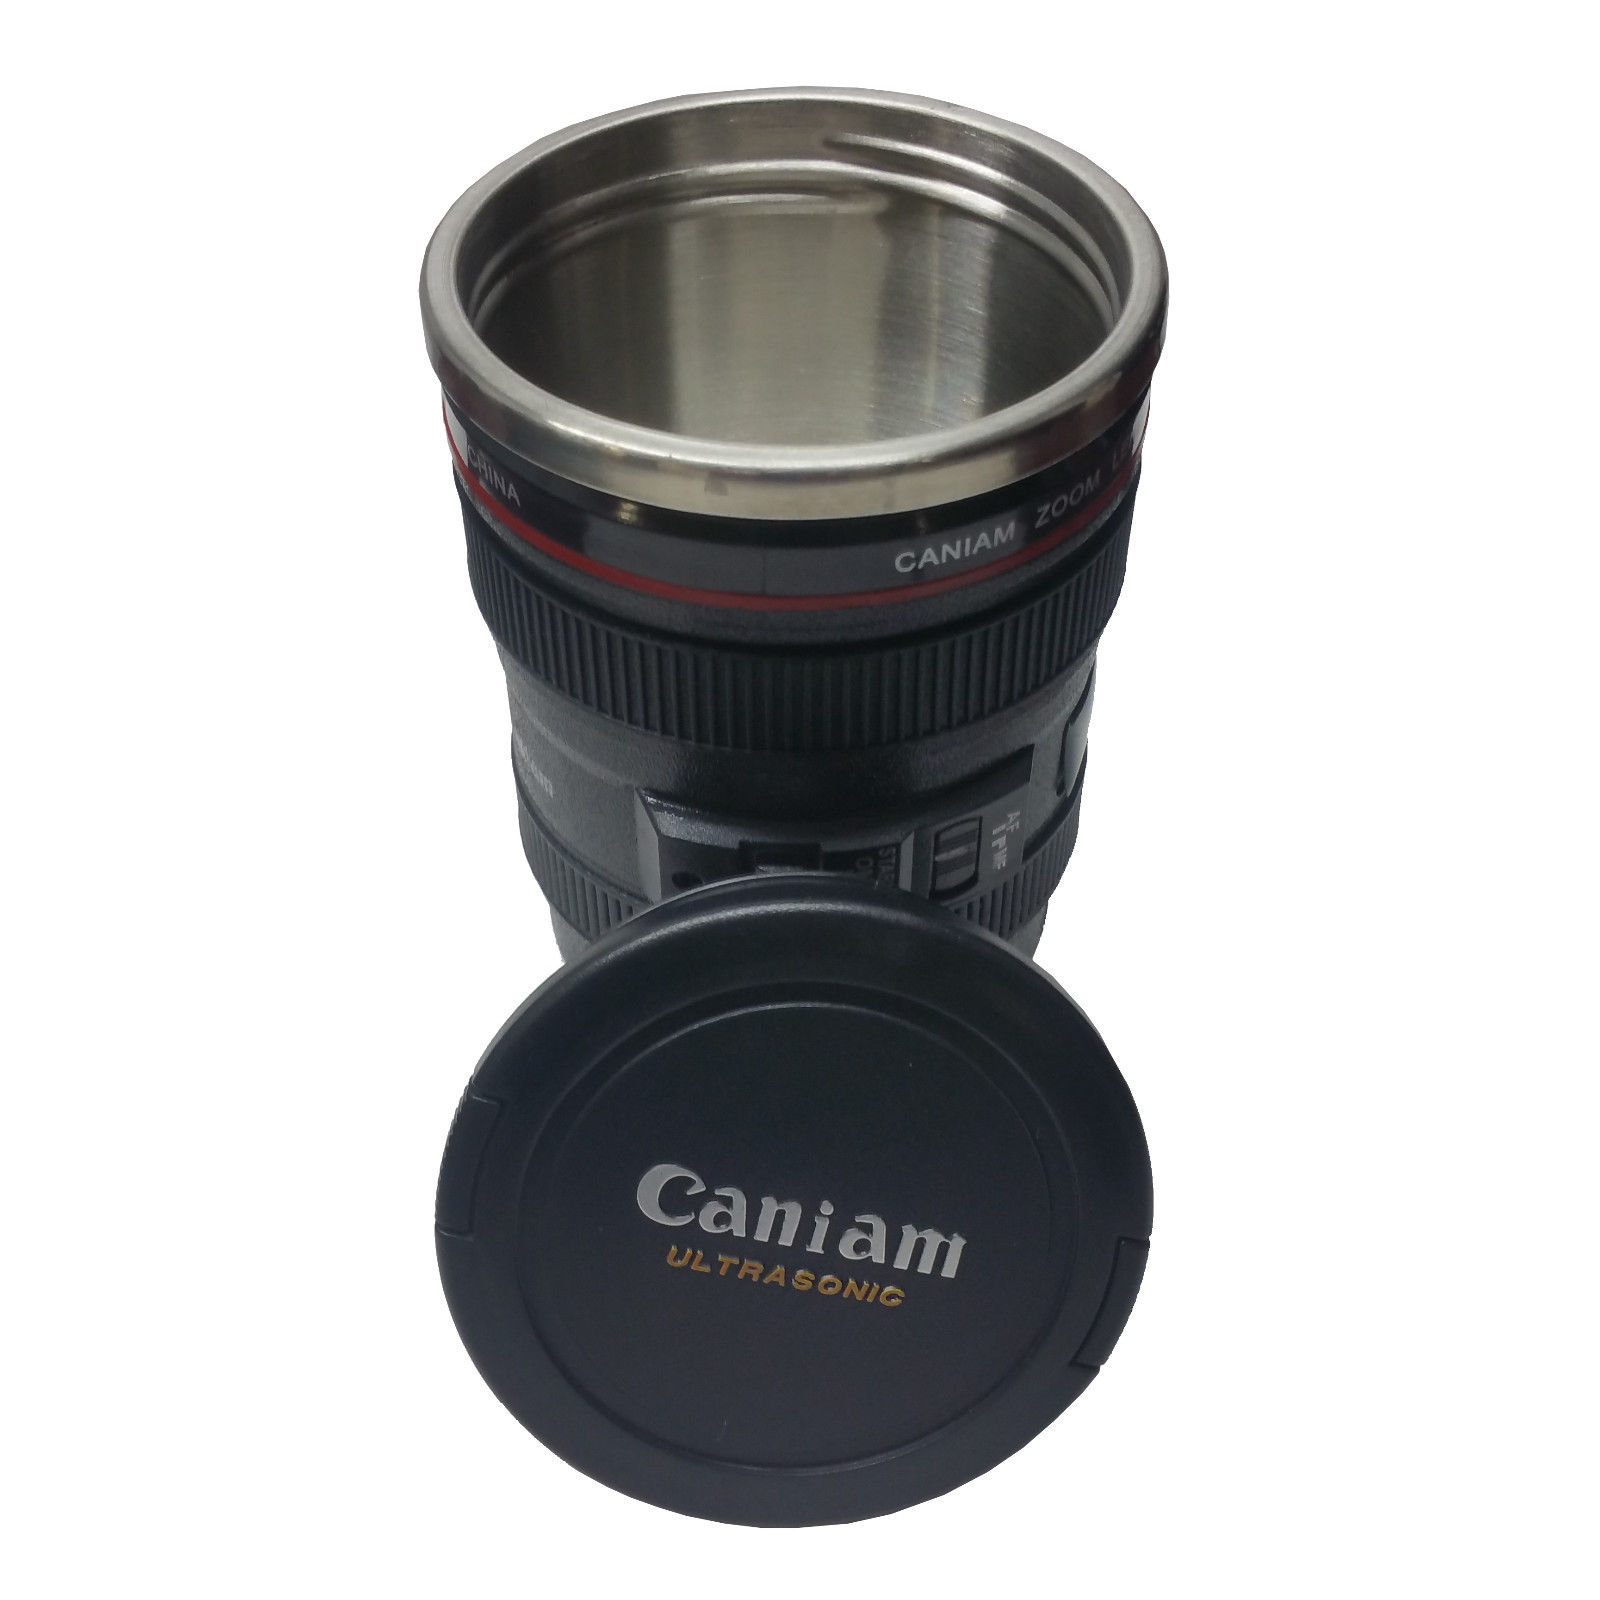 Camera Lens Stainless Steel Cup 24-105 CoffeeN#ea Travel Mug Thermos&Lens Lid T